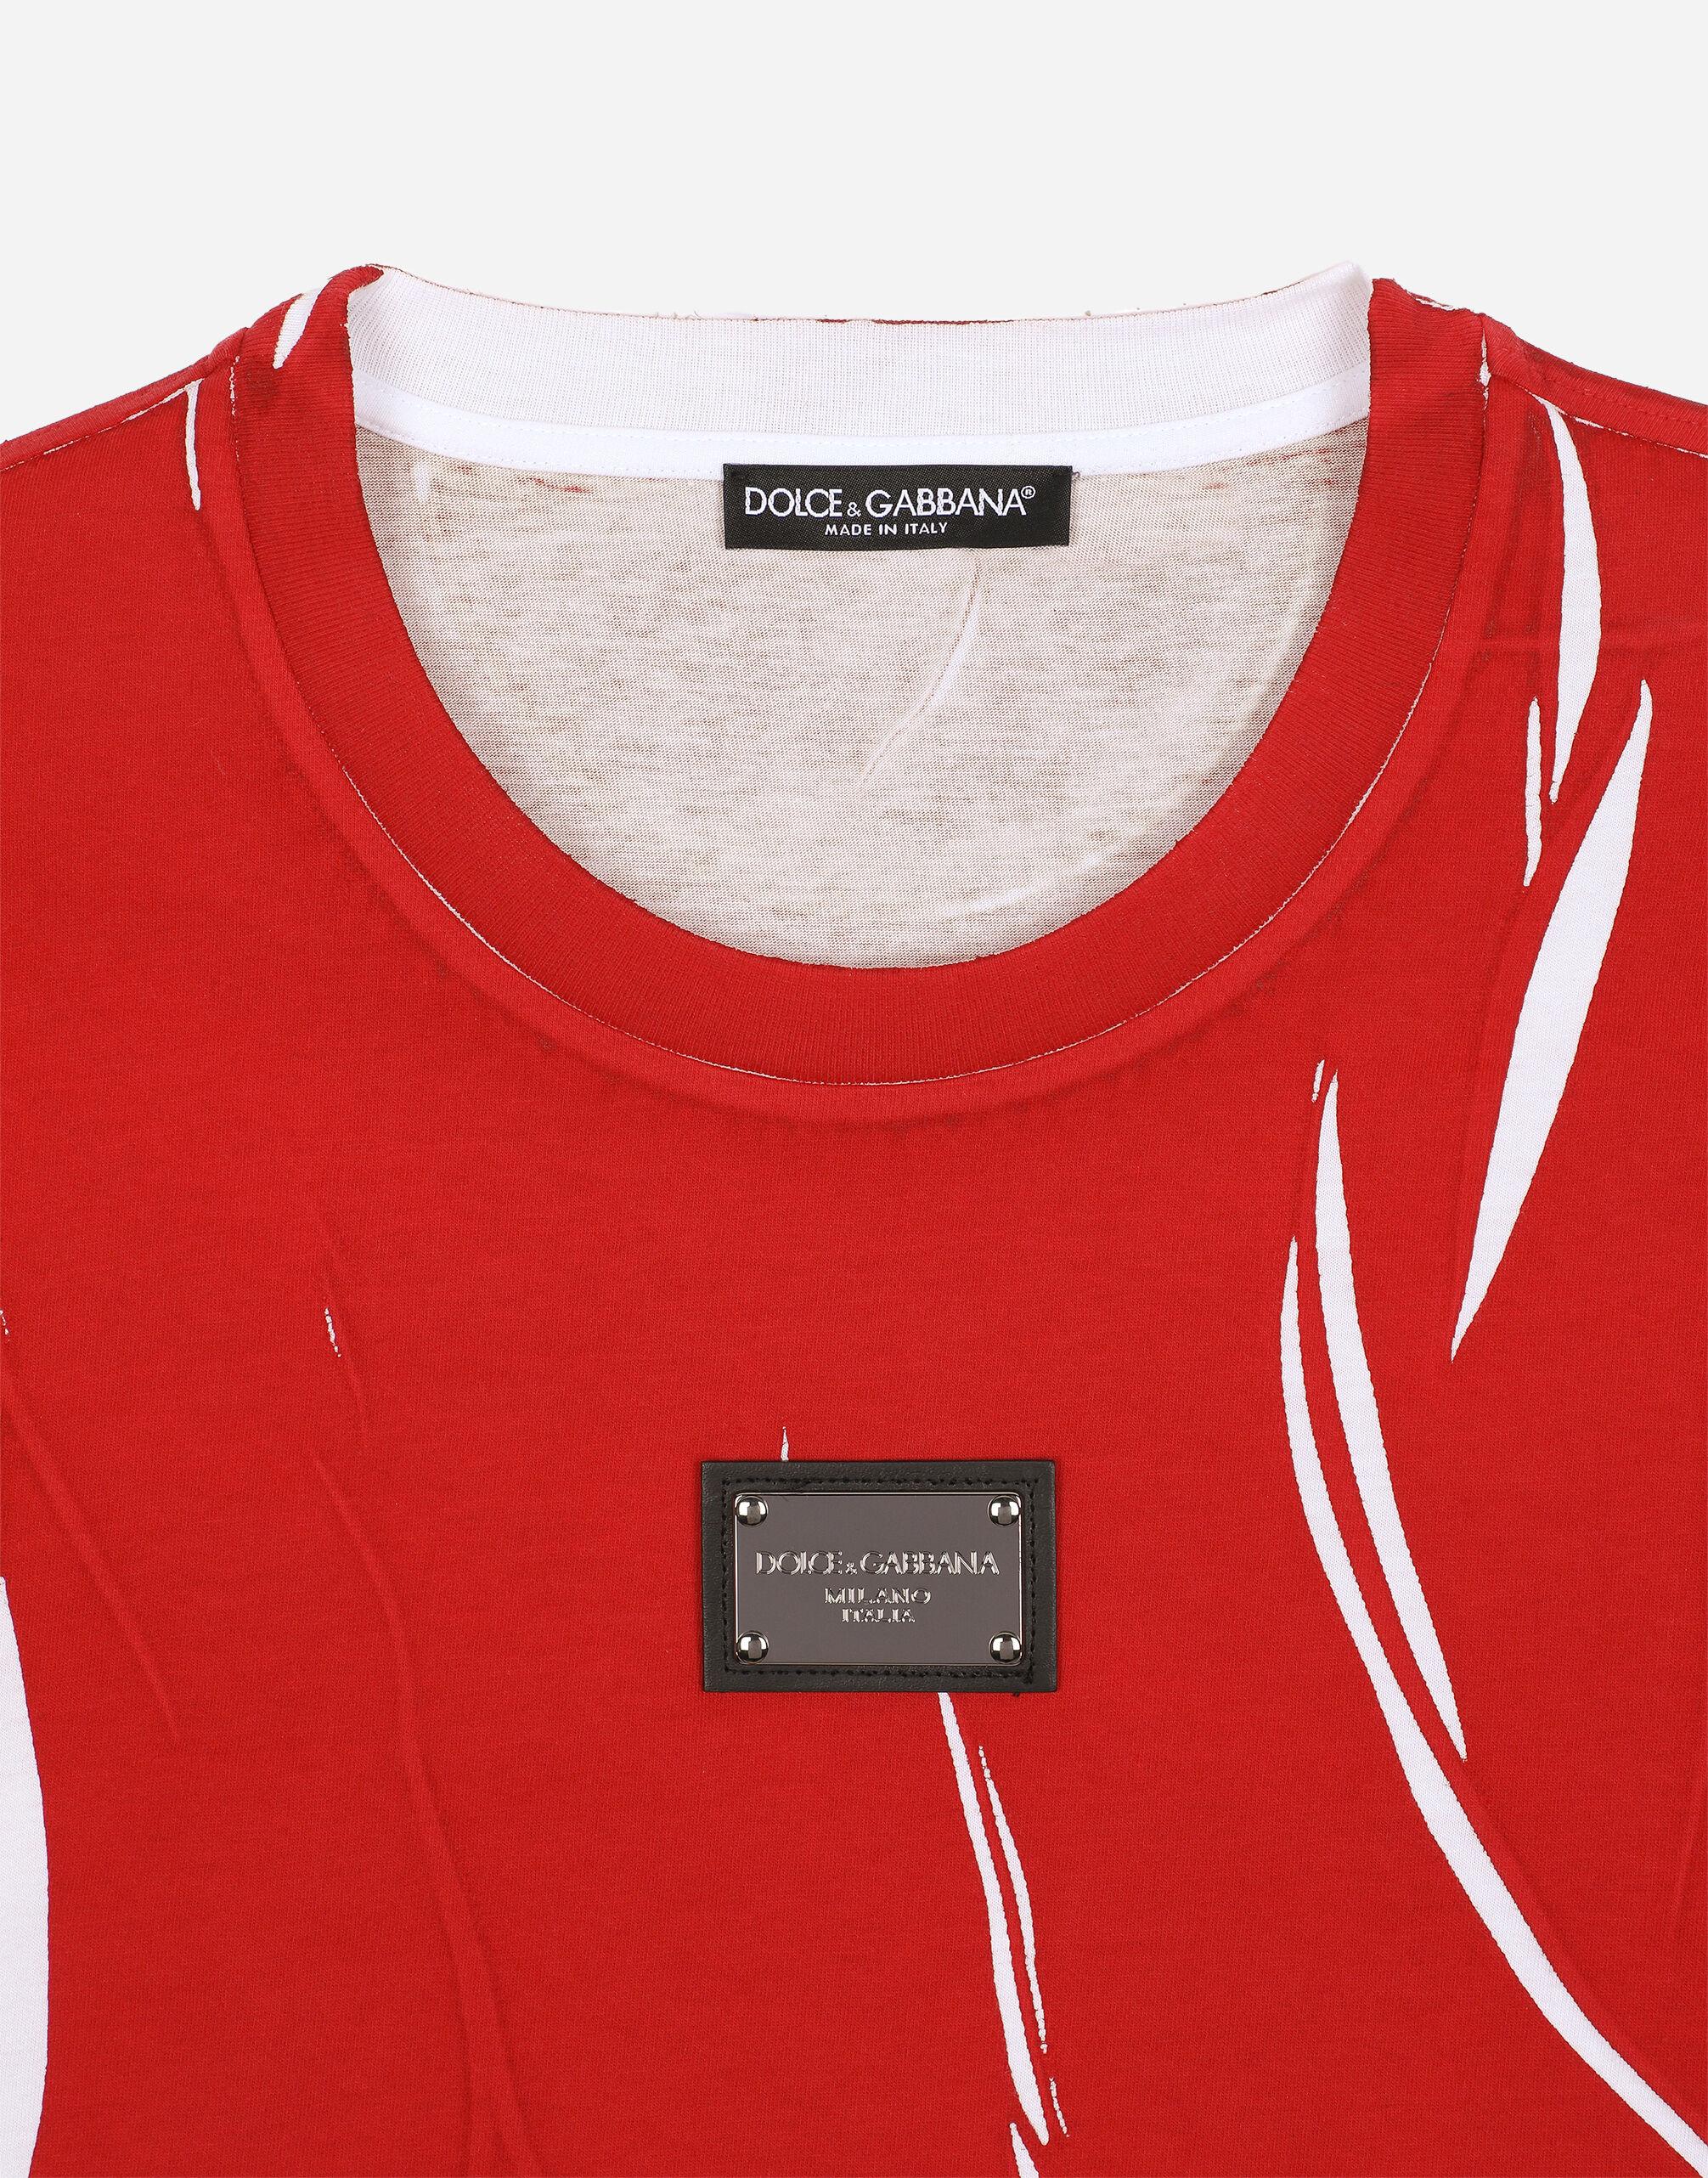 & Gabbana Overdyed T-shirt With Branded Tag in Red for Men | Lyst